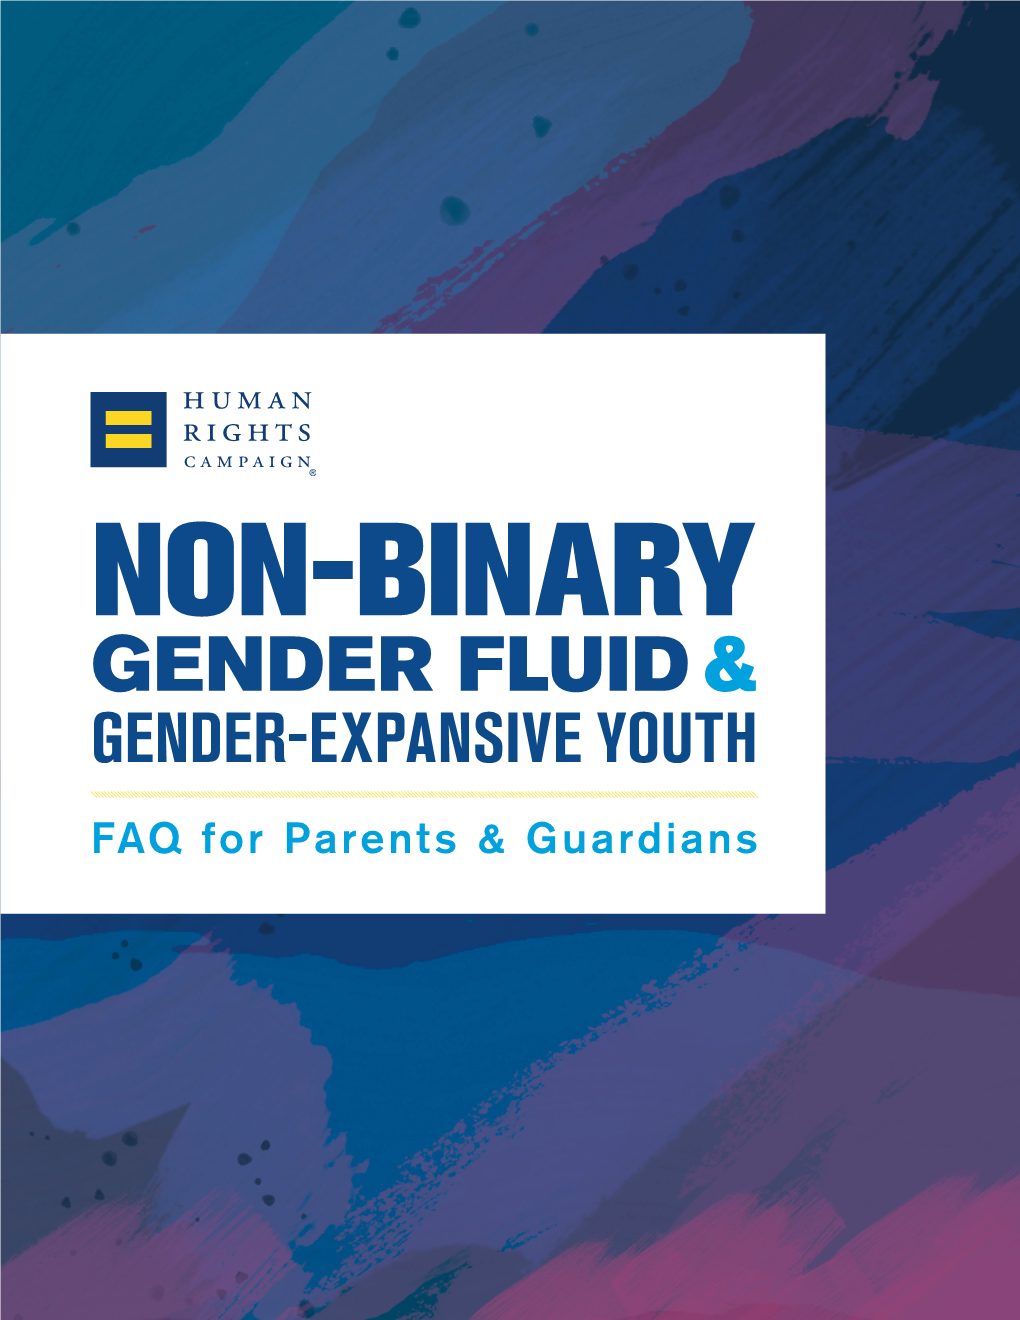 Non-Binary, Gender Fluid and Gender Expansive Youth